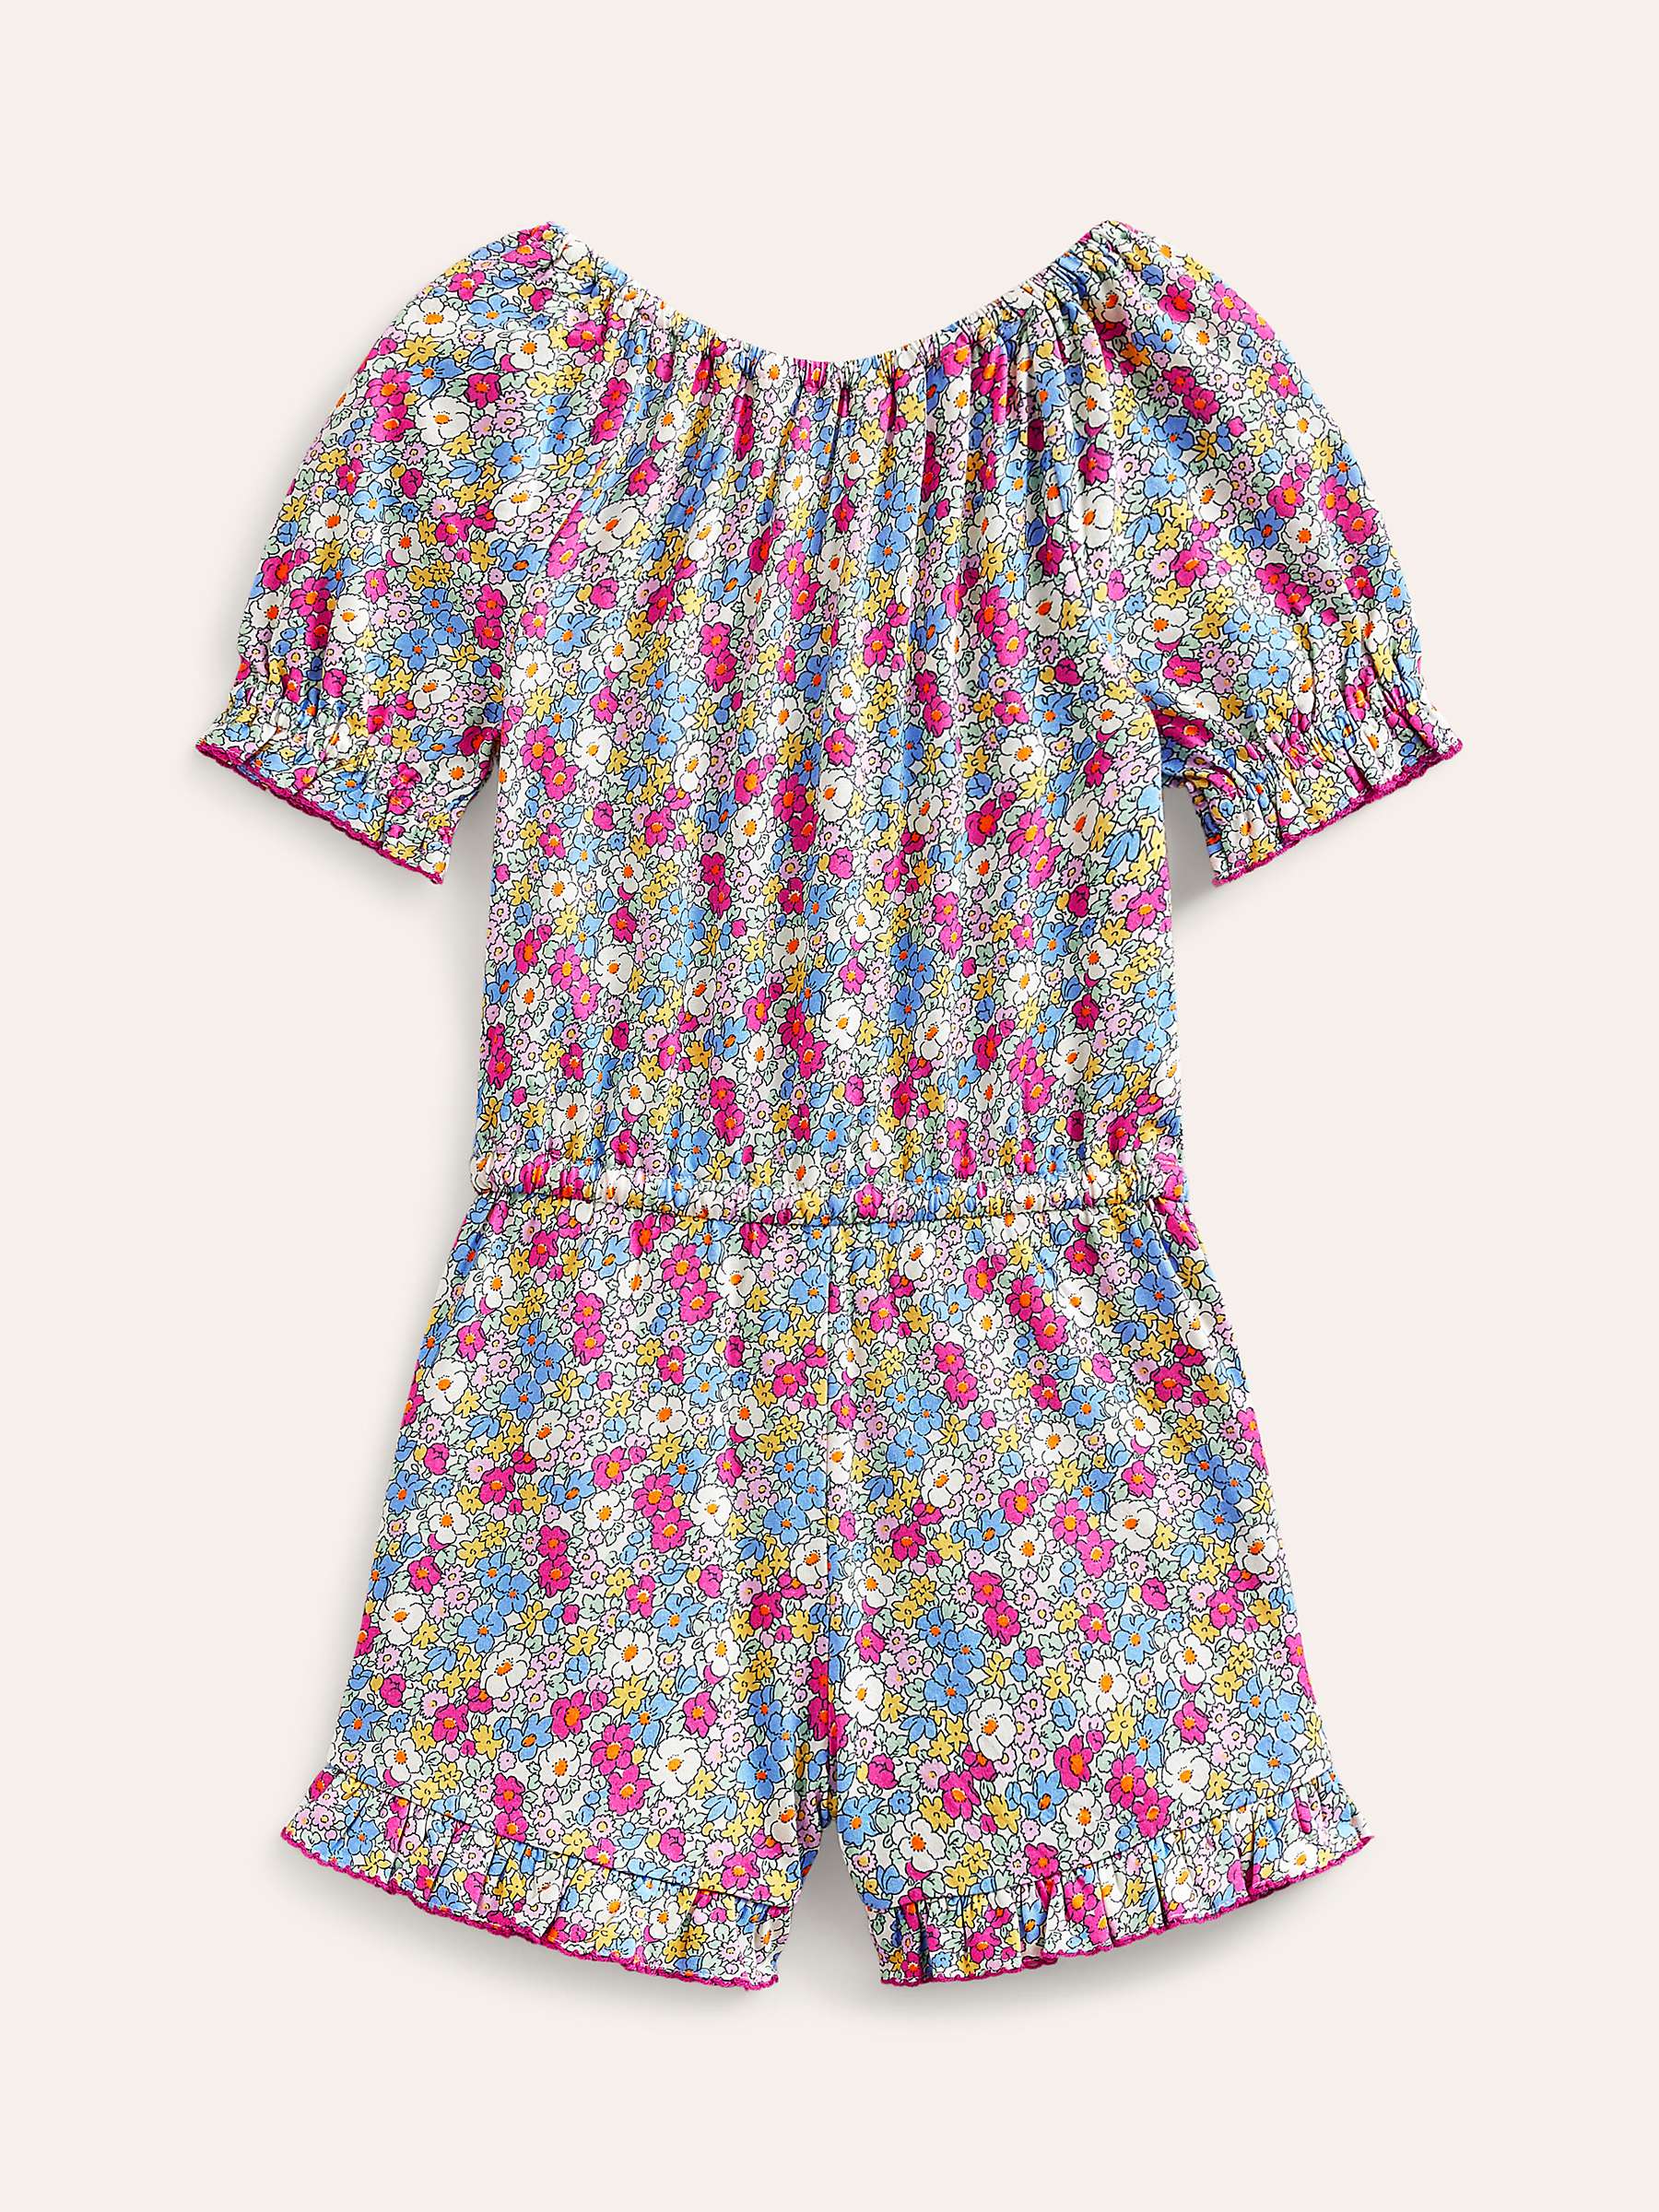 Buy Mini Boden Kids' Nautical Floral Print Jersey Playsuit, Pink/Multi Online at johnlewis.com